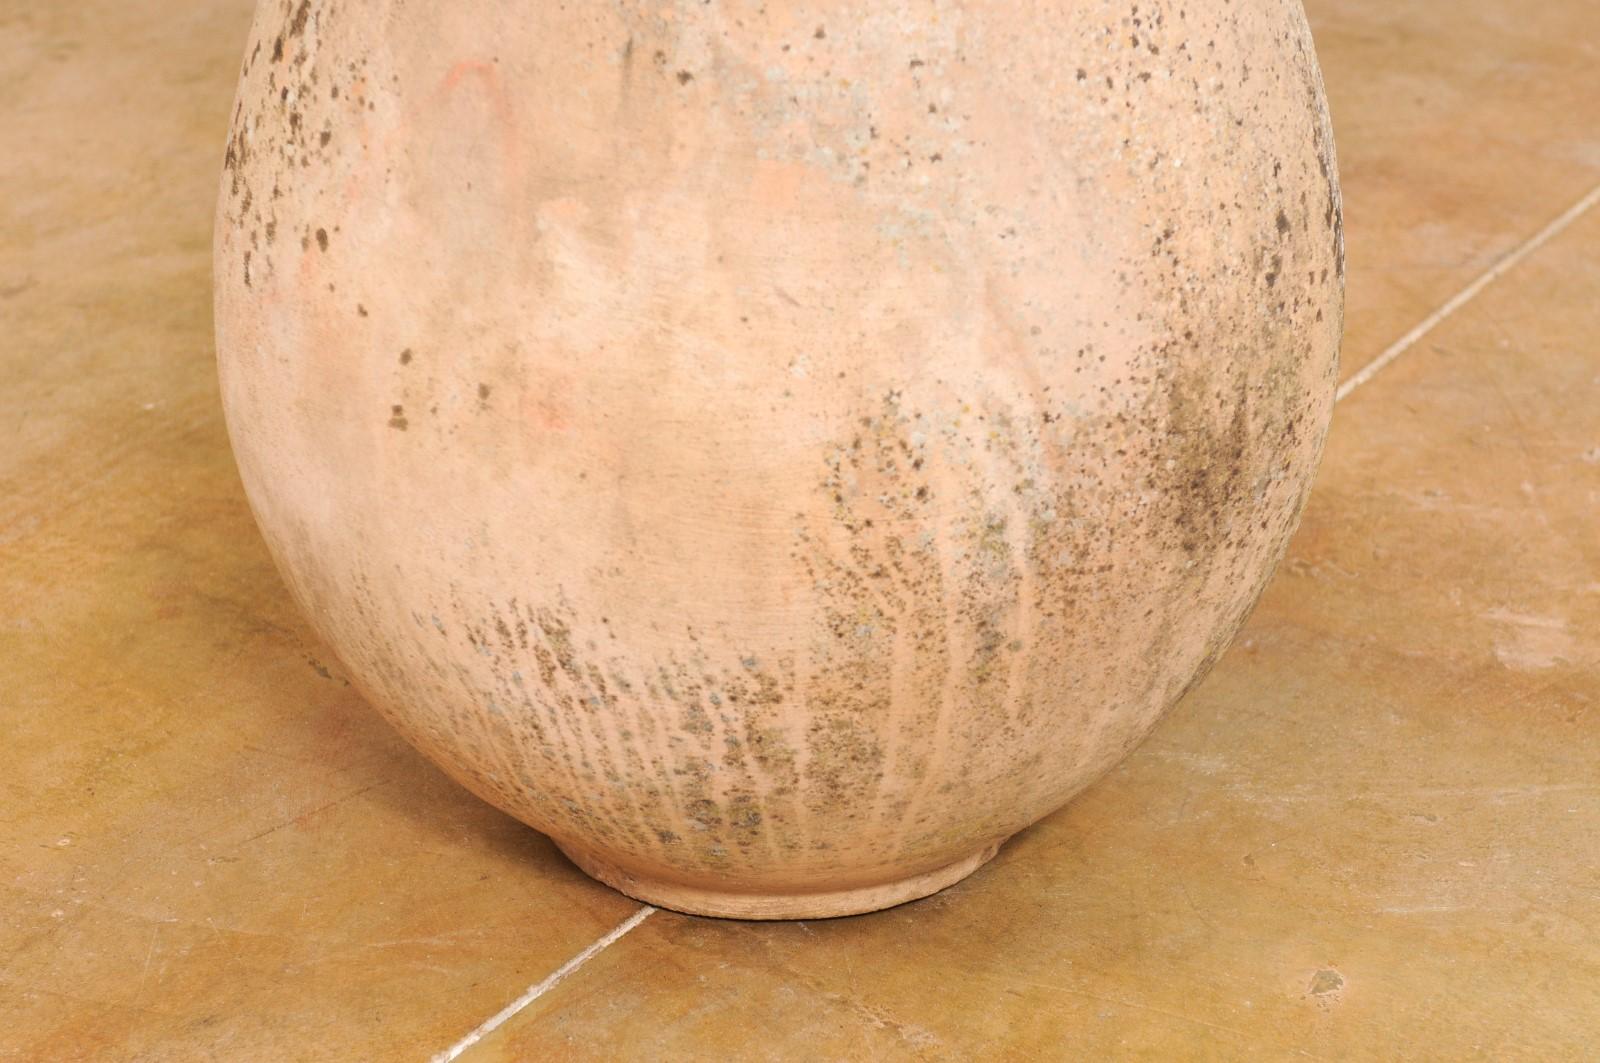 French 19th Century Biot Pottery Jar with Yellow Glaze and Dripping Effect In Good Condition For Sale In Atlanta, GA